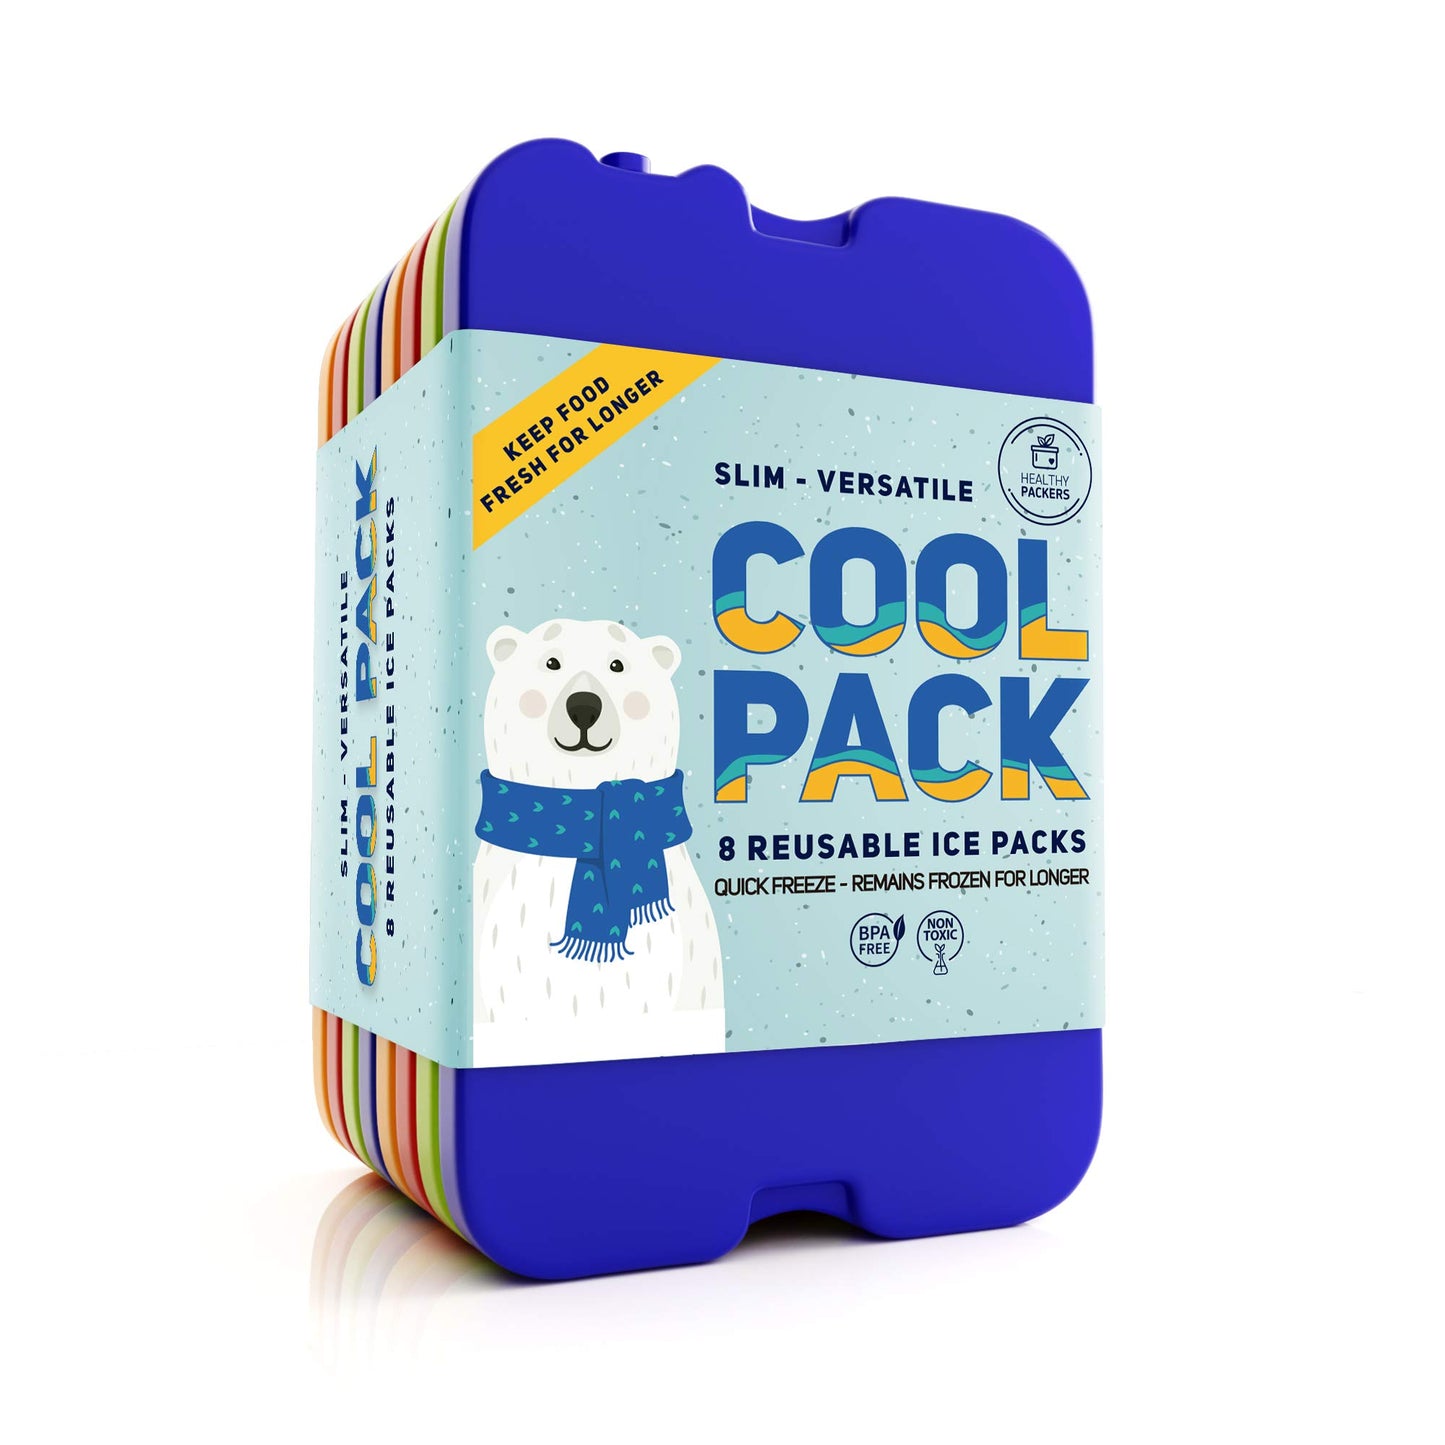 Healthy Packers Ice Pack for Lunch Box - Freezer Packs - Original Cool Pack | Slim & Long-Lasting Reusable Ice Packs for Lunch Bags and Cooler Bag (Set of 4)